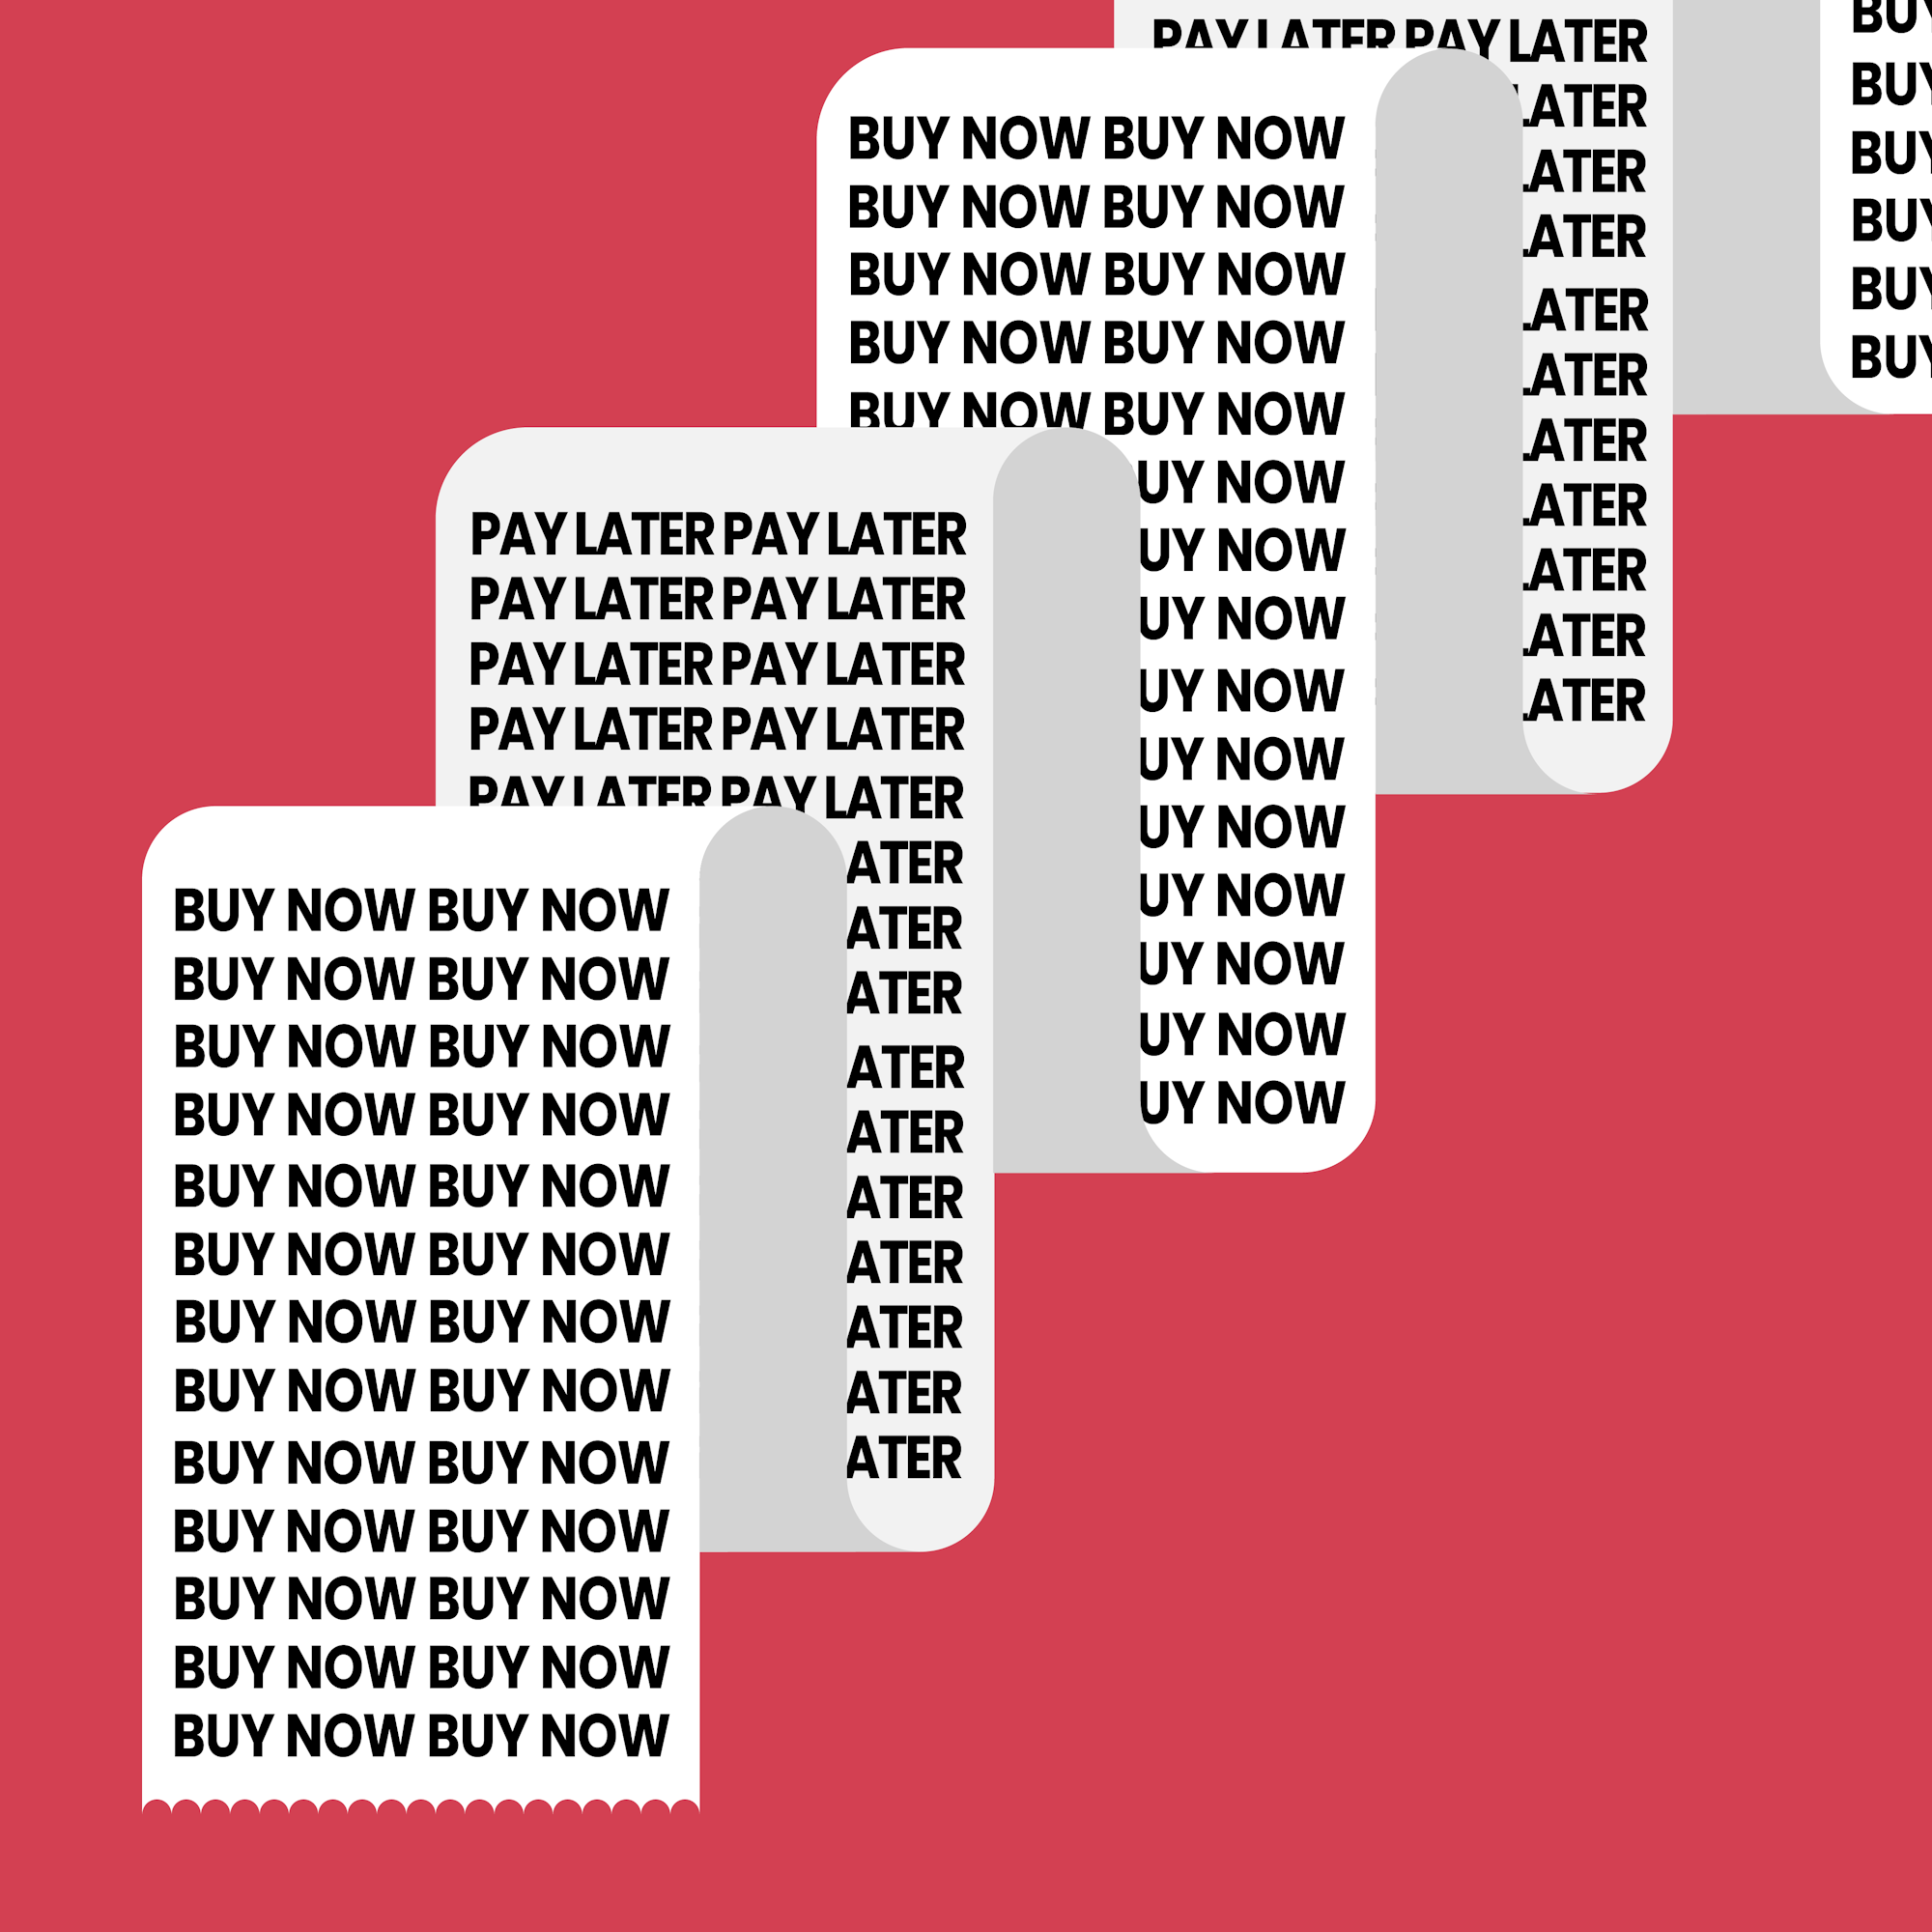 Receipt featuring the words 'buy now pay later' on red background.